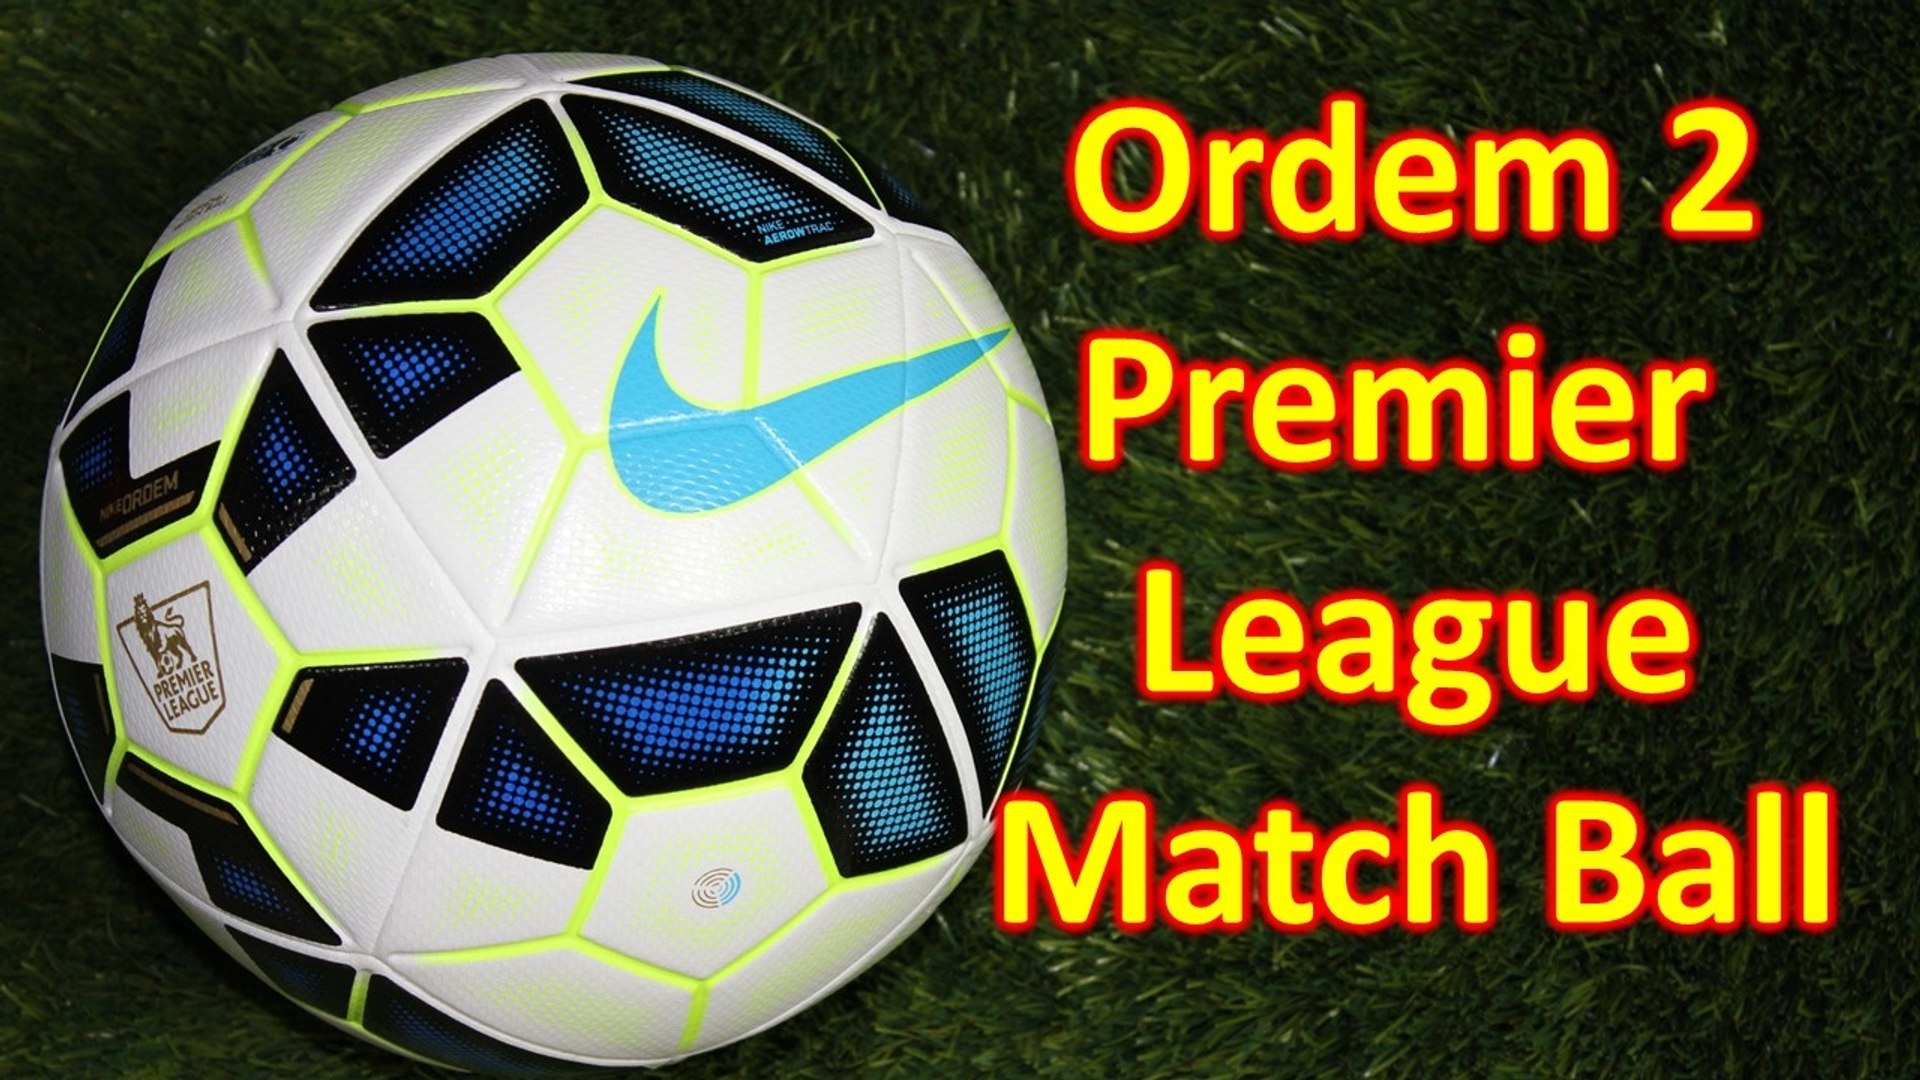 Premier League Nike Ordem 2 Official Match Ball Review - video Dailymotion